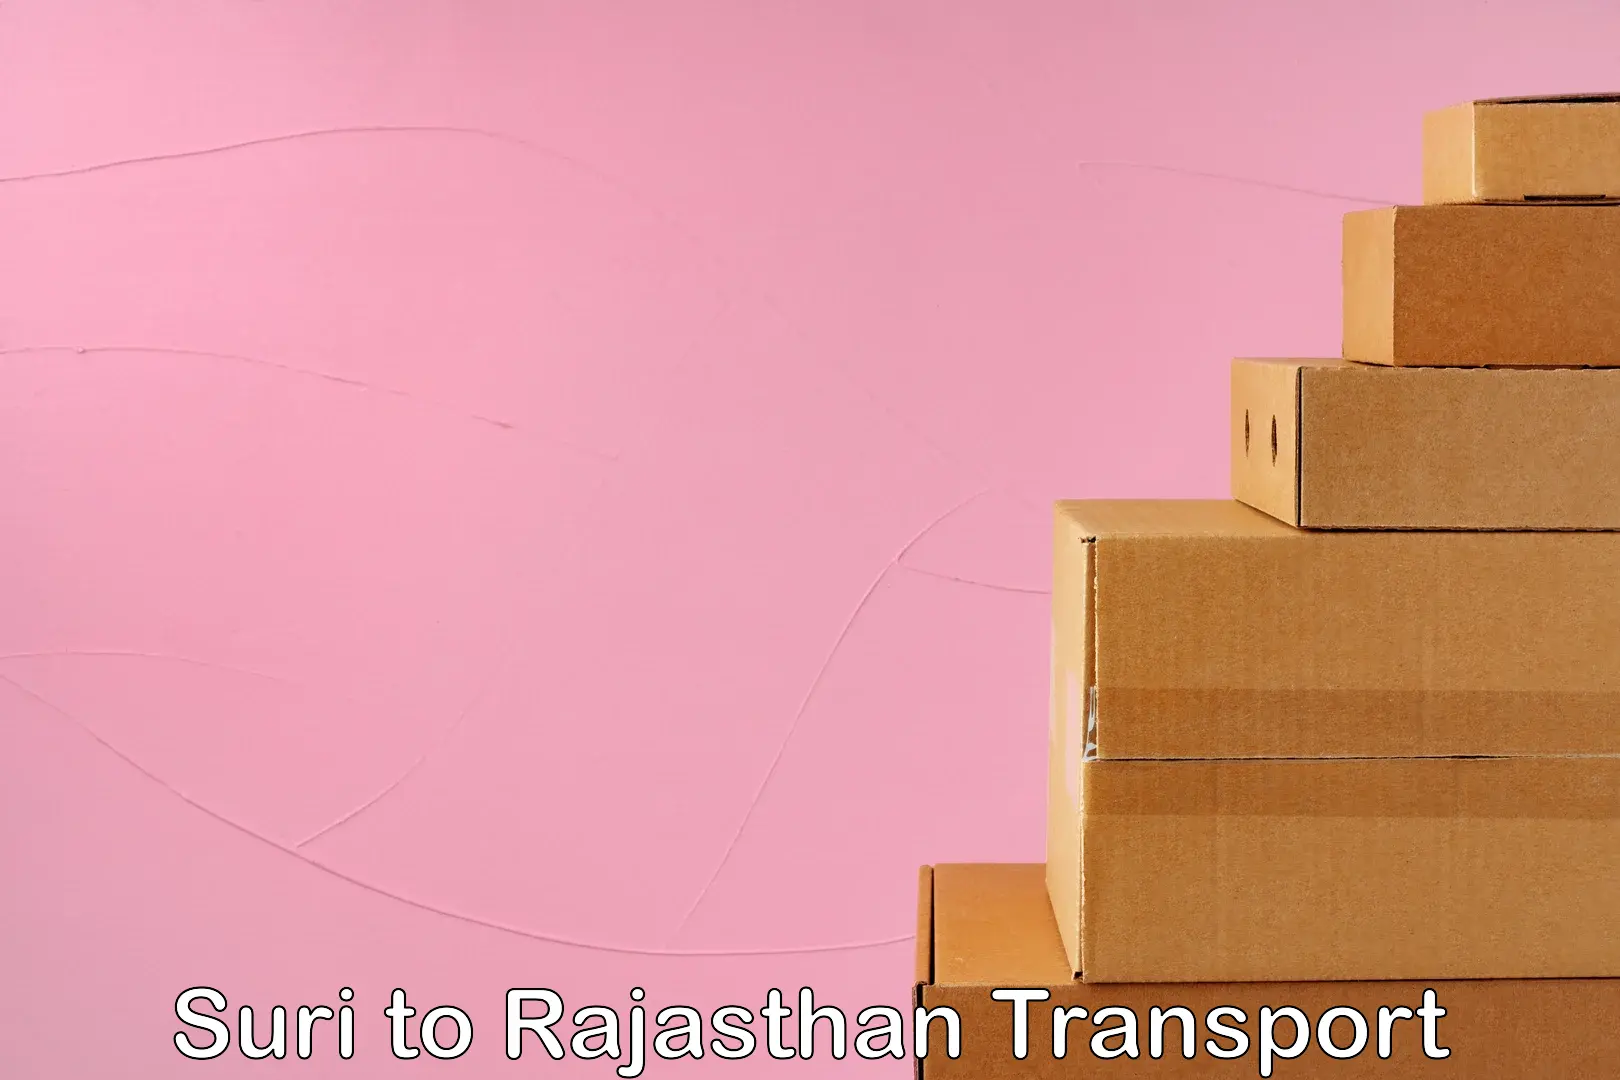 Delivery service Suri to Rajasthan